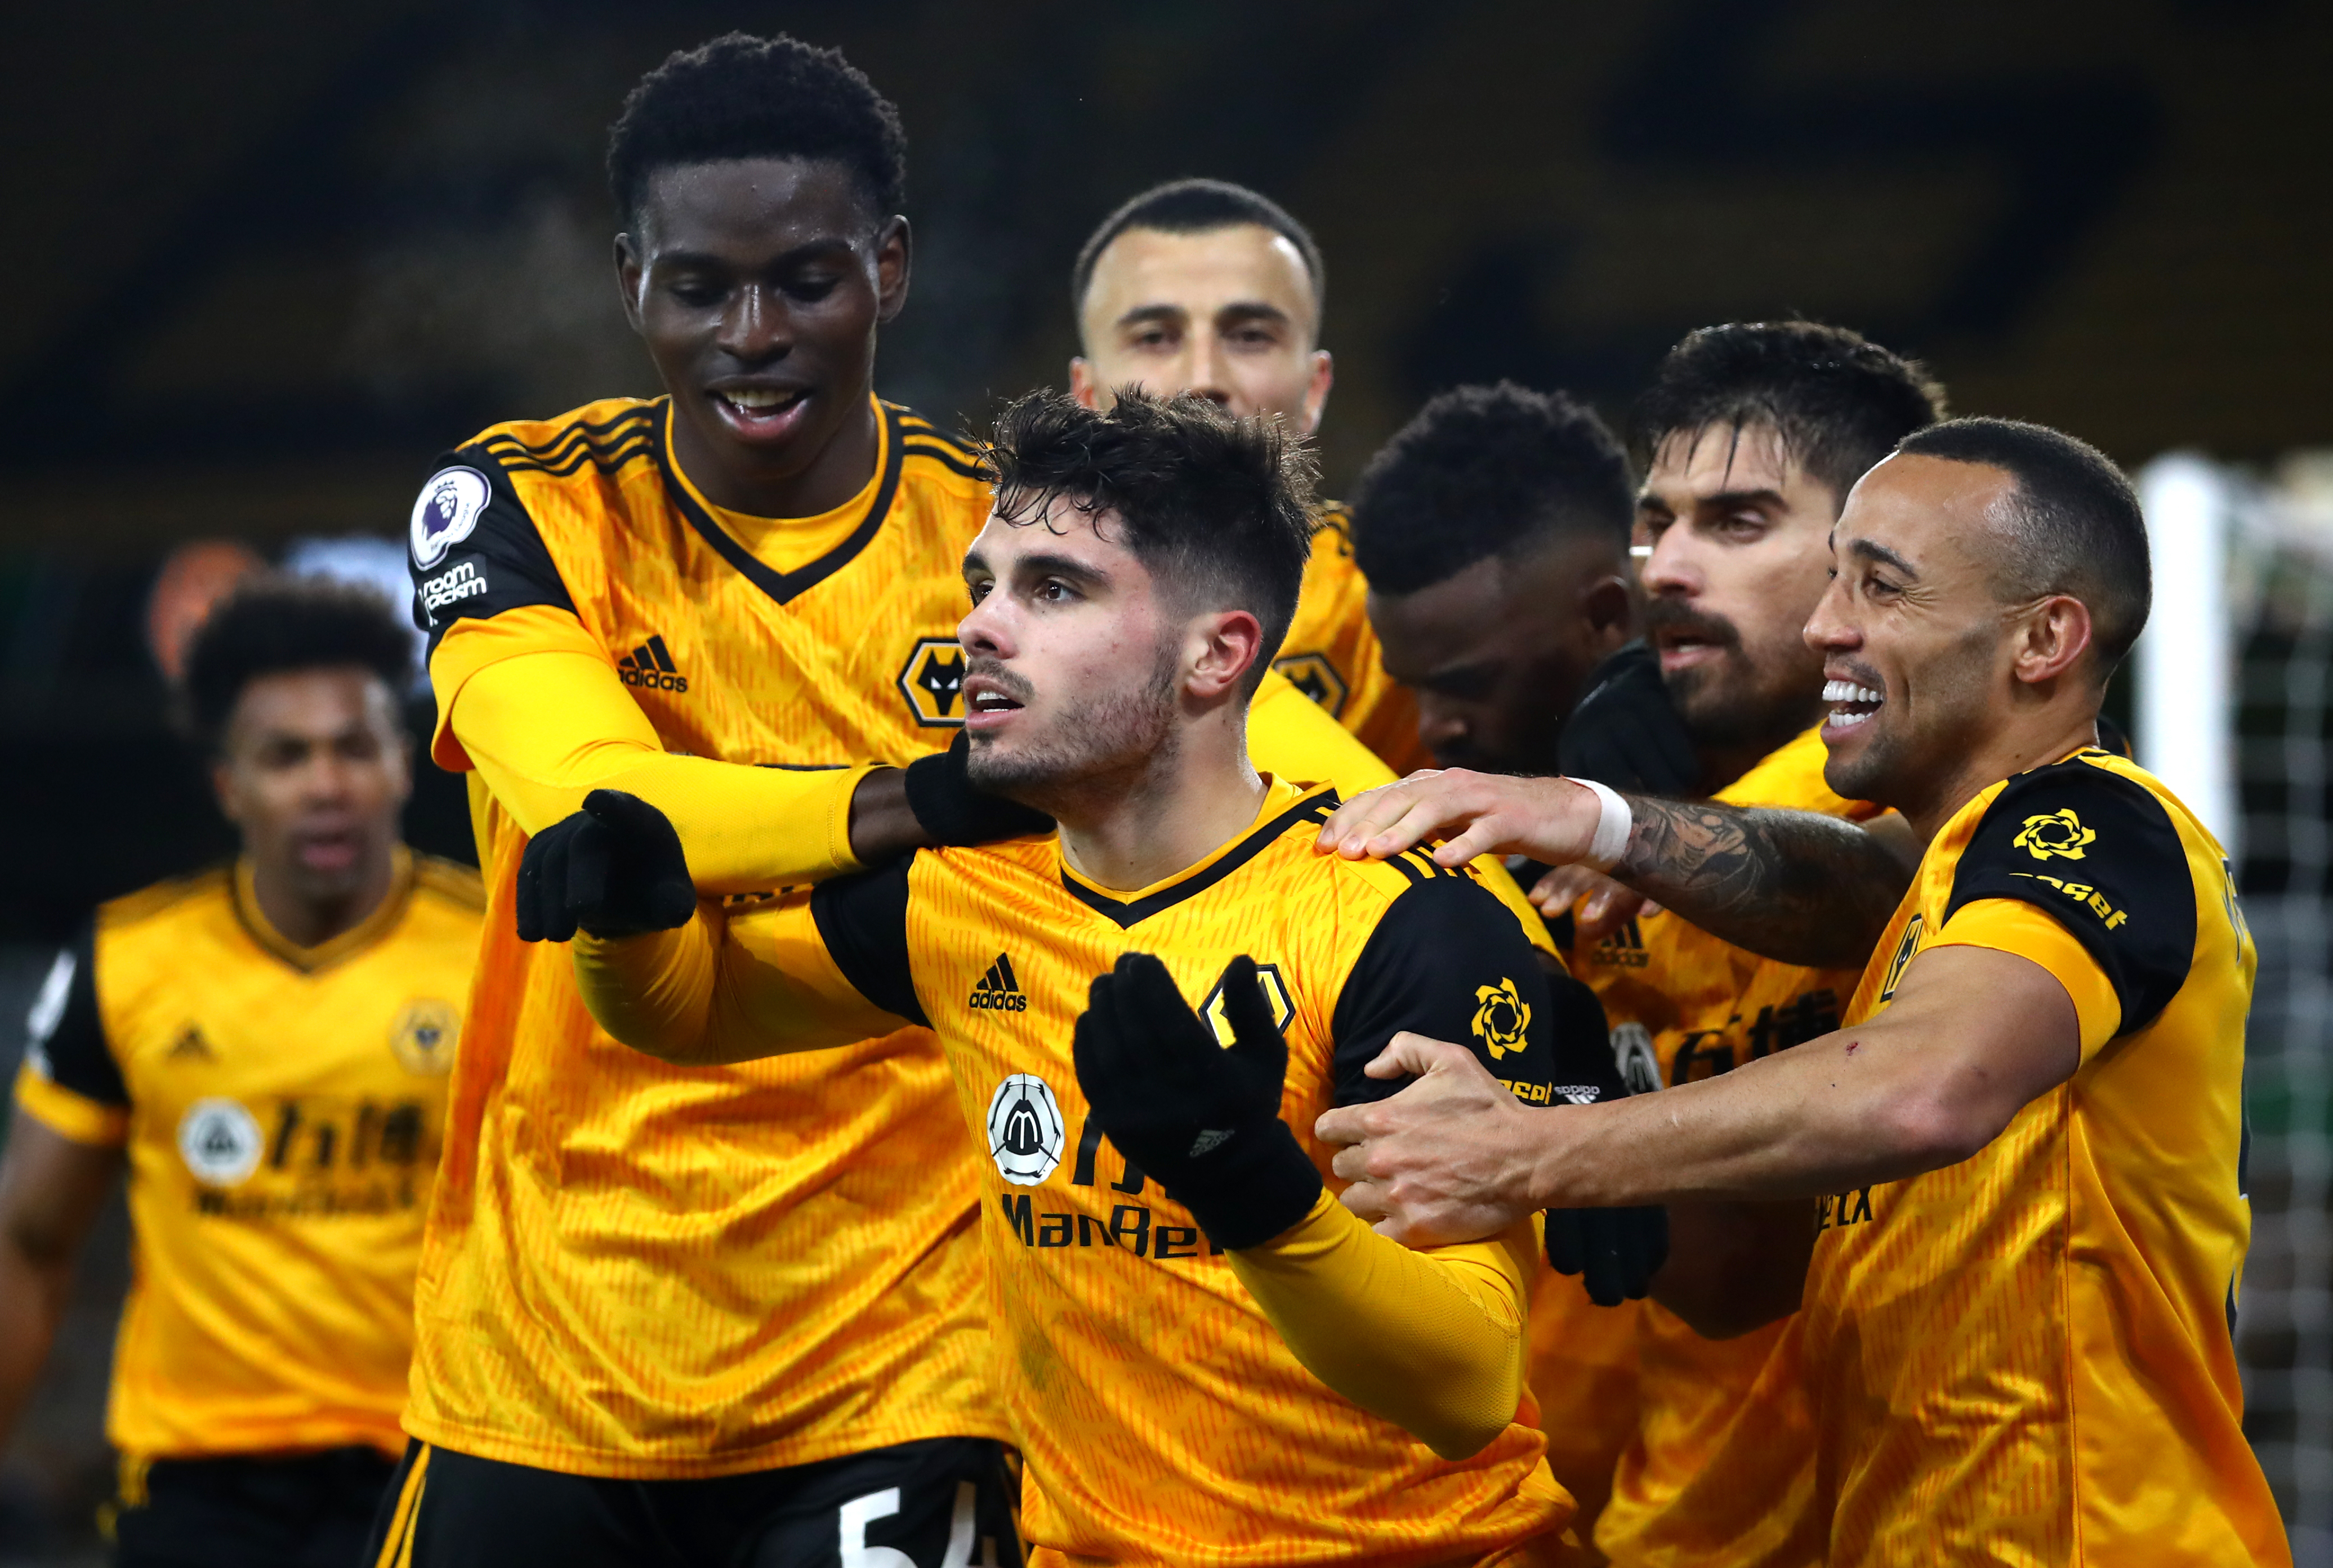 Chelsea vs Wolves Highlights: Two Americans Star In EPL Duel